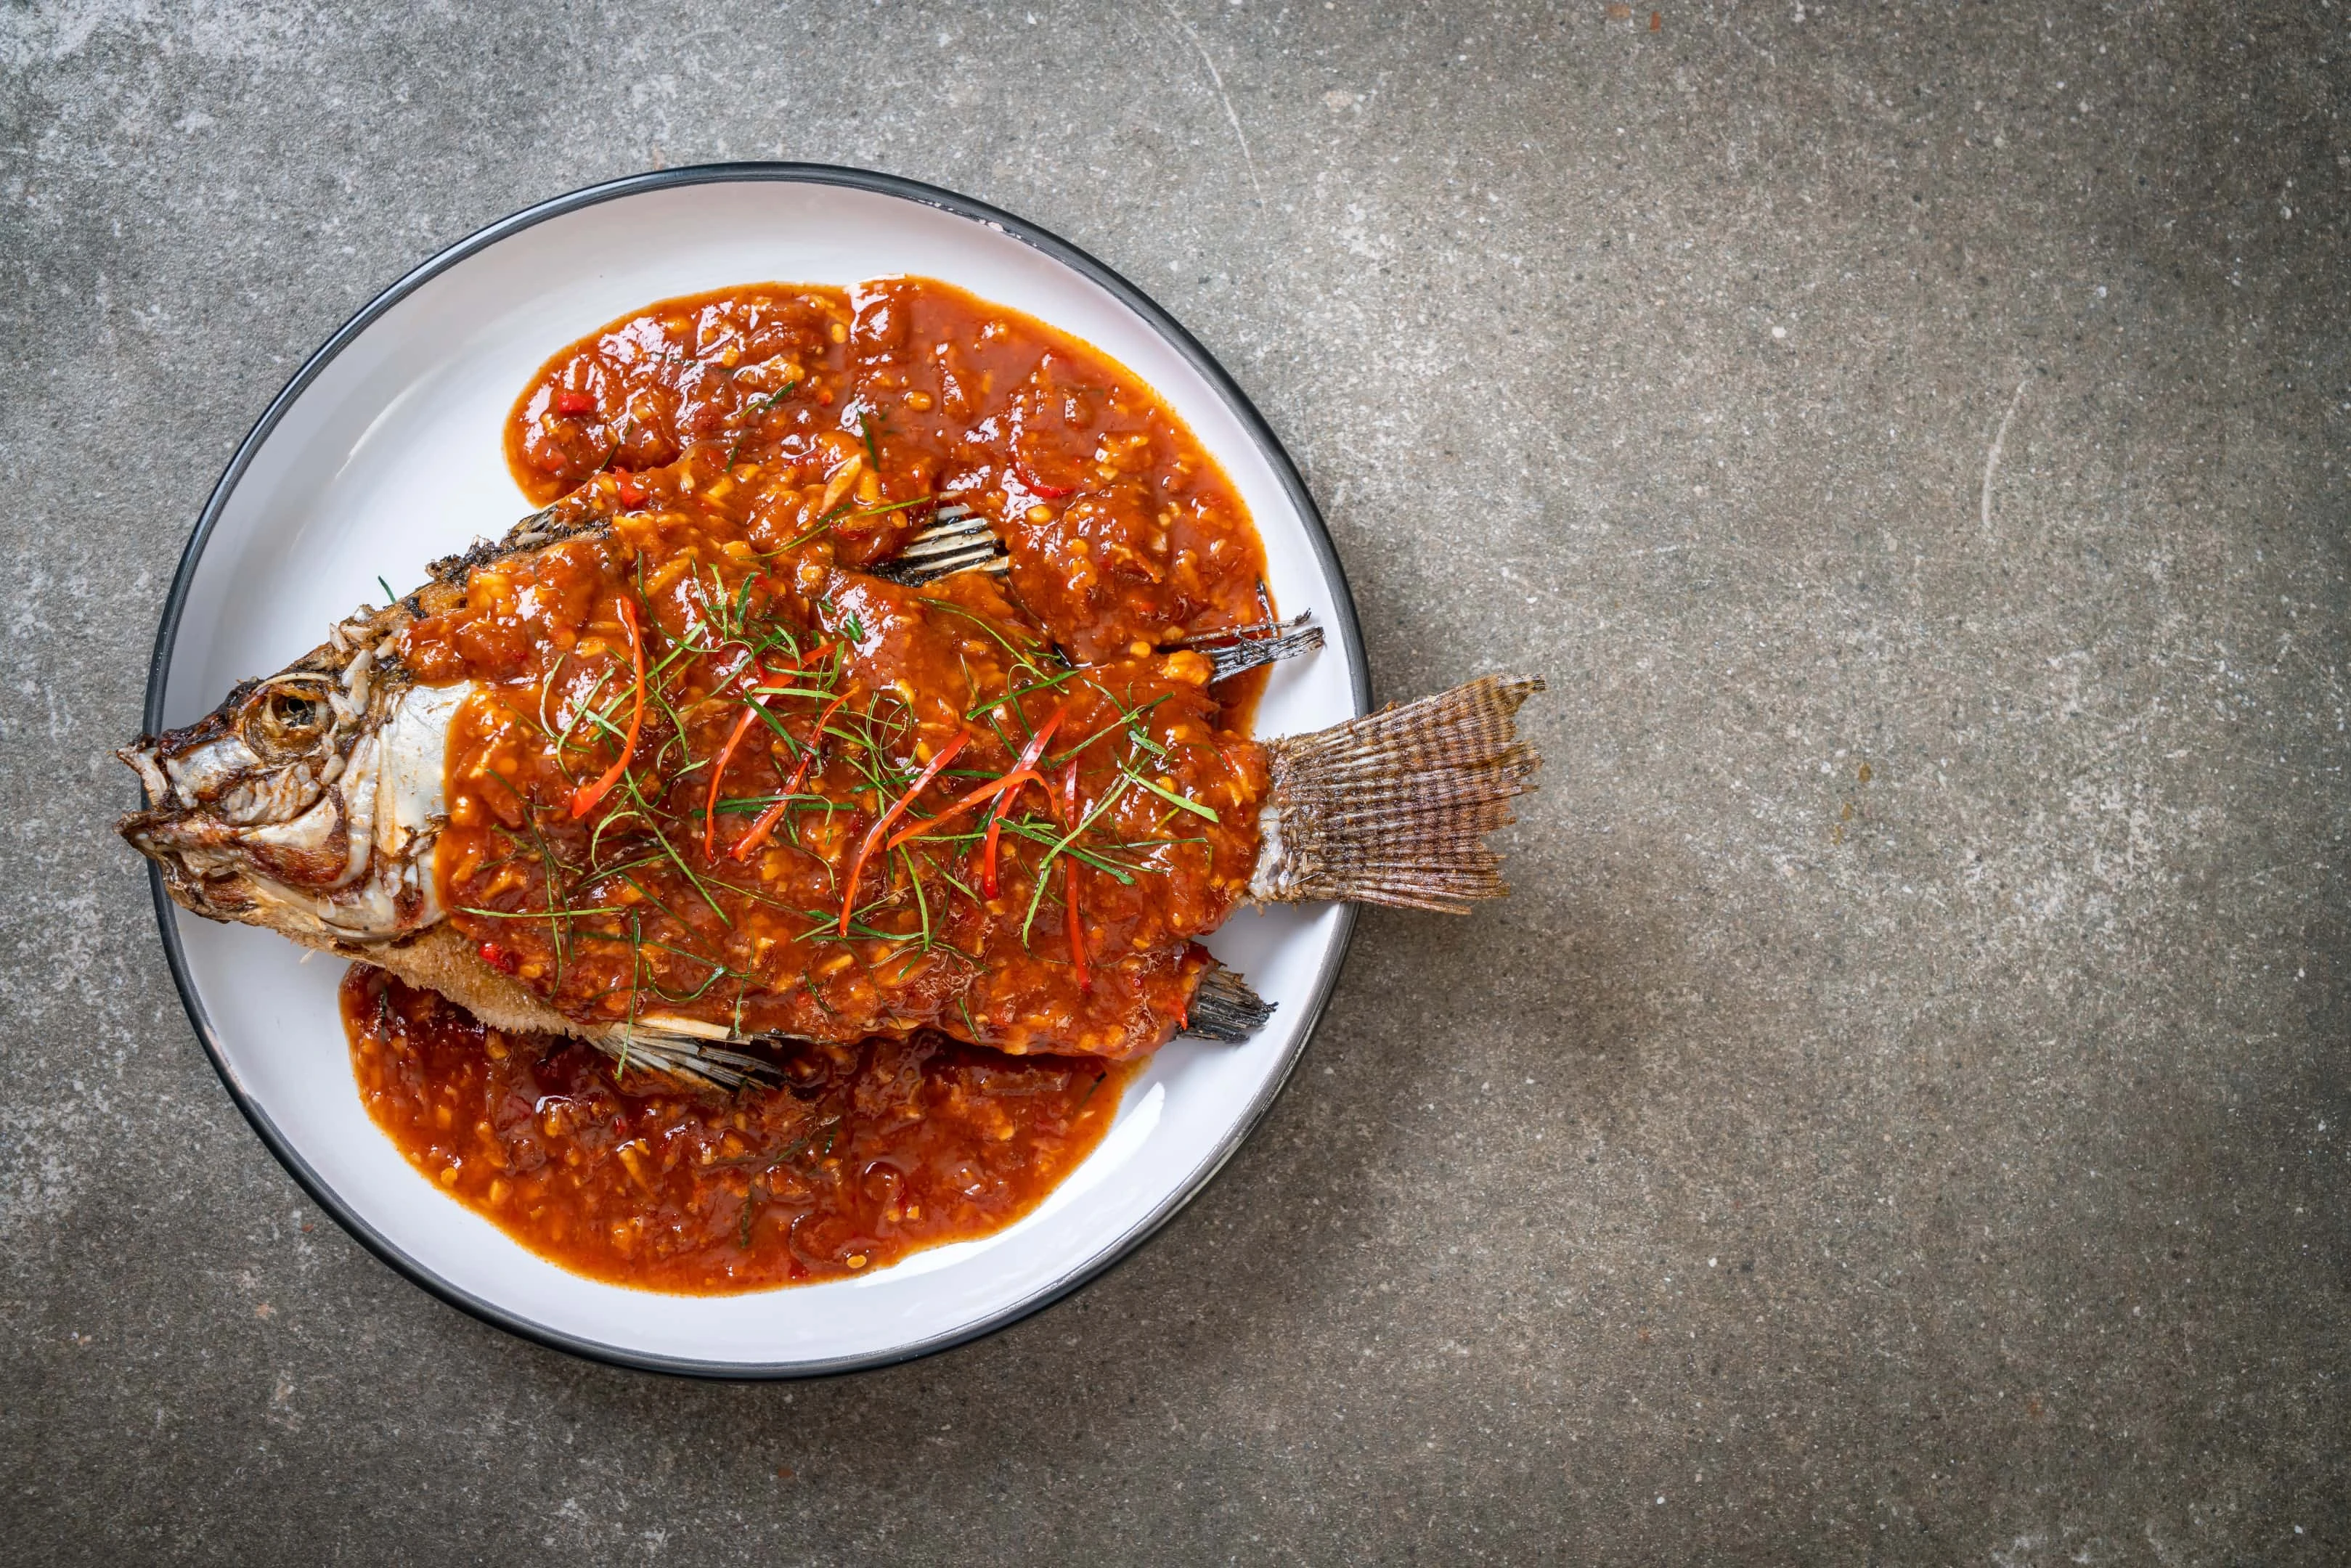 Fried fish with xo sauce. Fish is part of the food to lower creatinine.